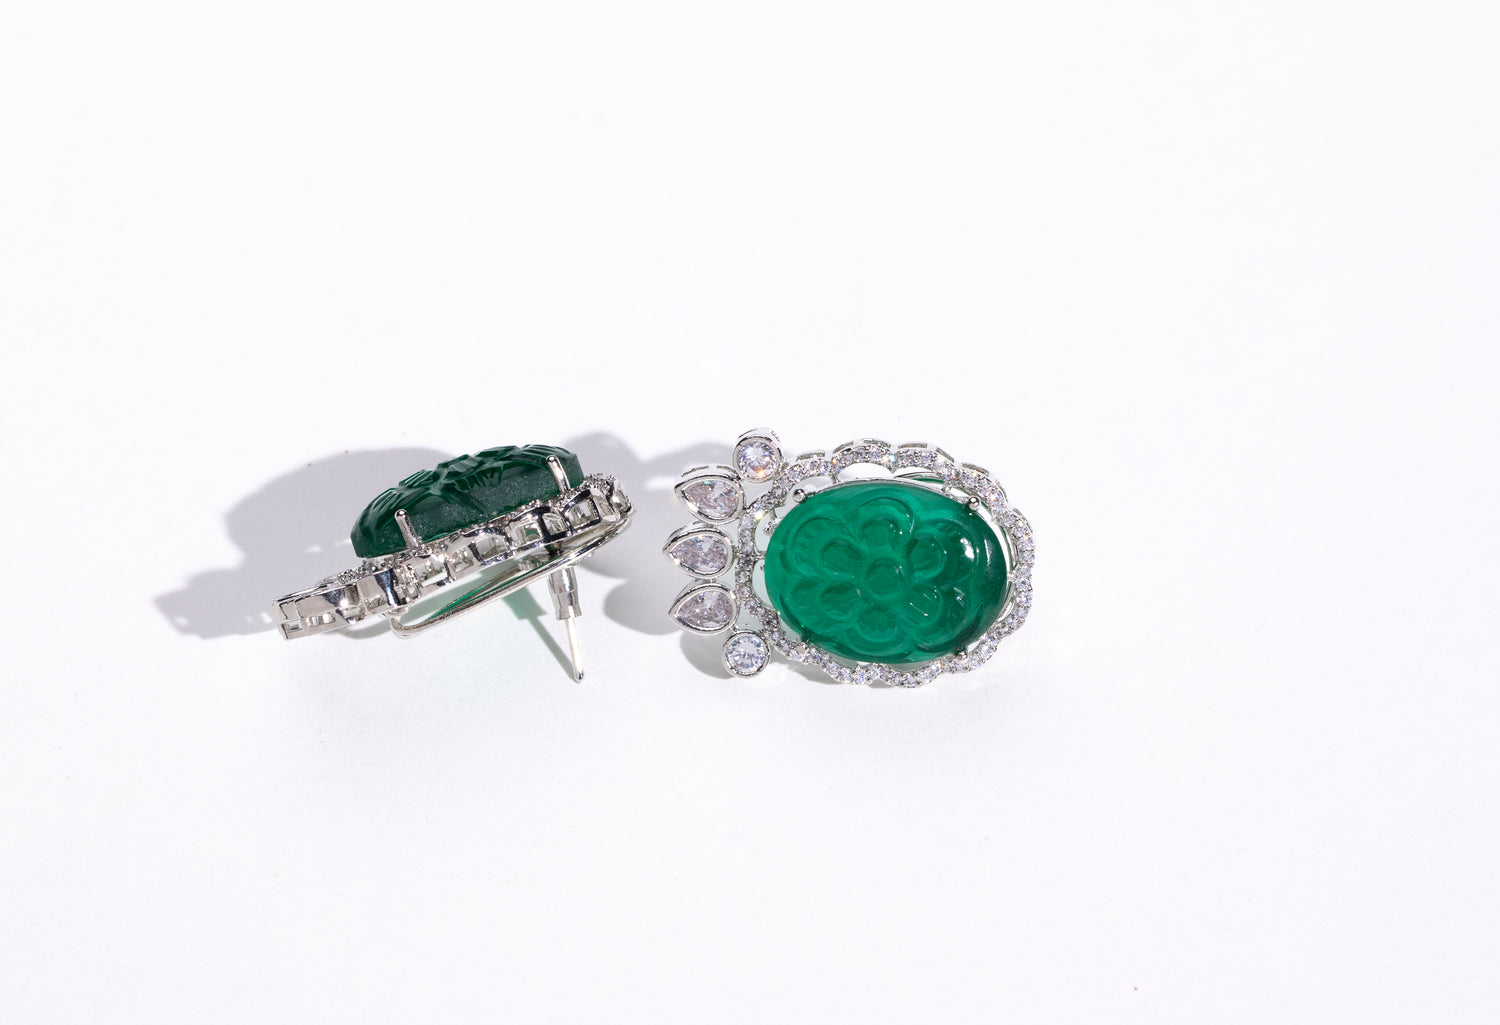 Investment in Jewelry: Classic Emerald Swarovski Earrings: Perfect for enhancing any outfit with their timeless design.